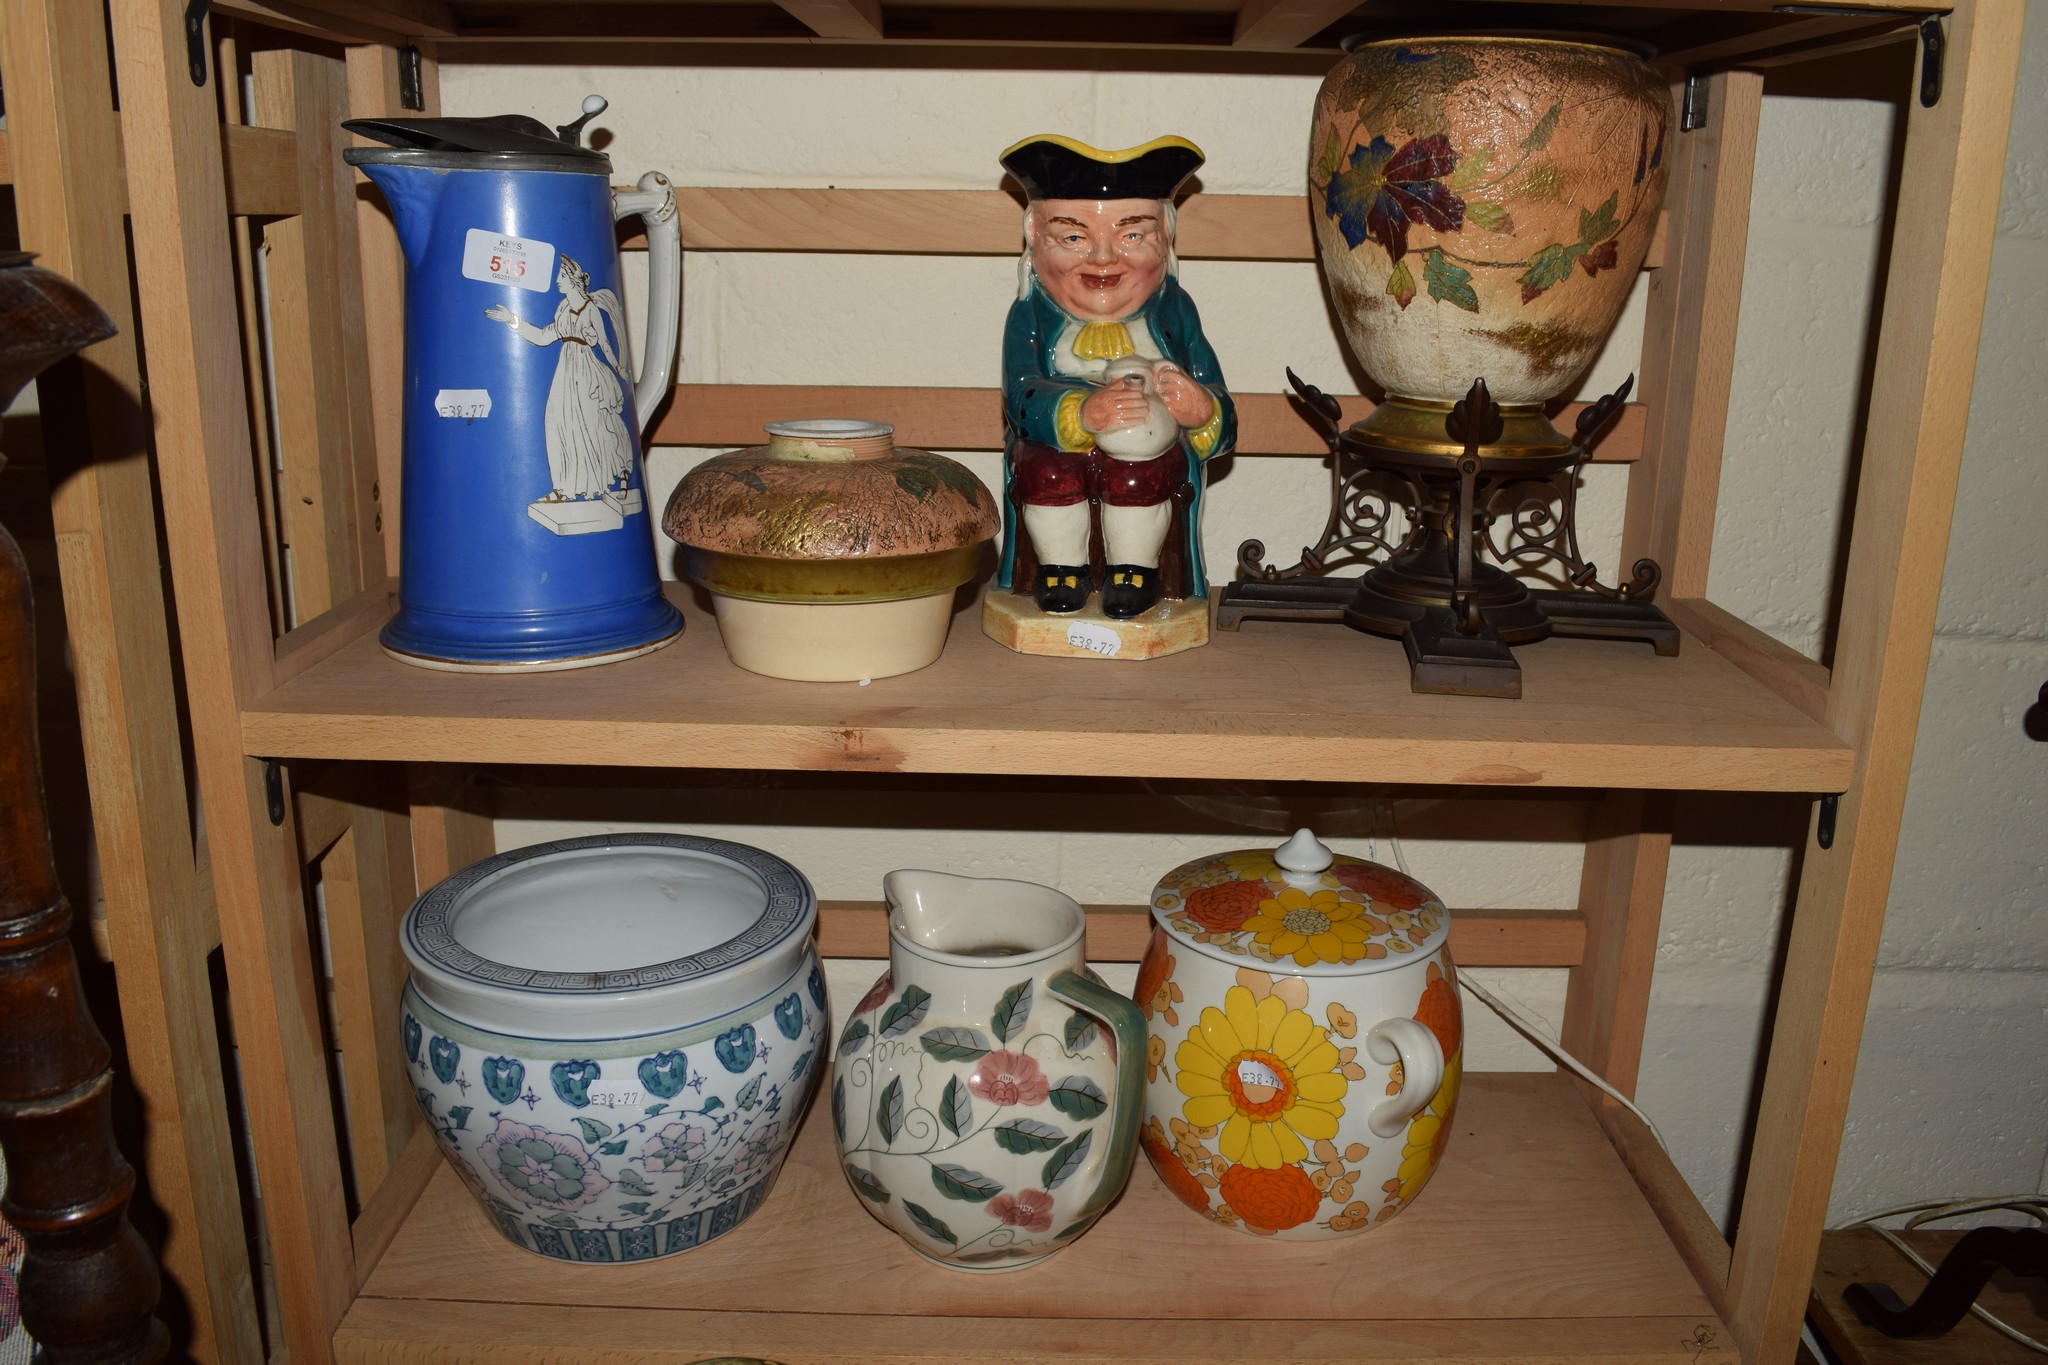 FURNIVALS CERAMIC OIL LAMP WITH METAL MOUNTS, A TOBY JUG AND A 19TH CENTURY JUG WITH CLASSICAL